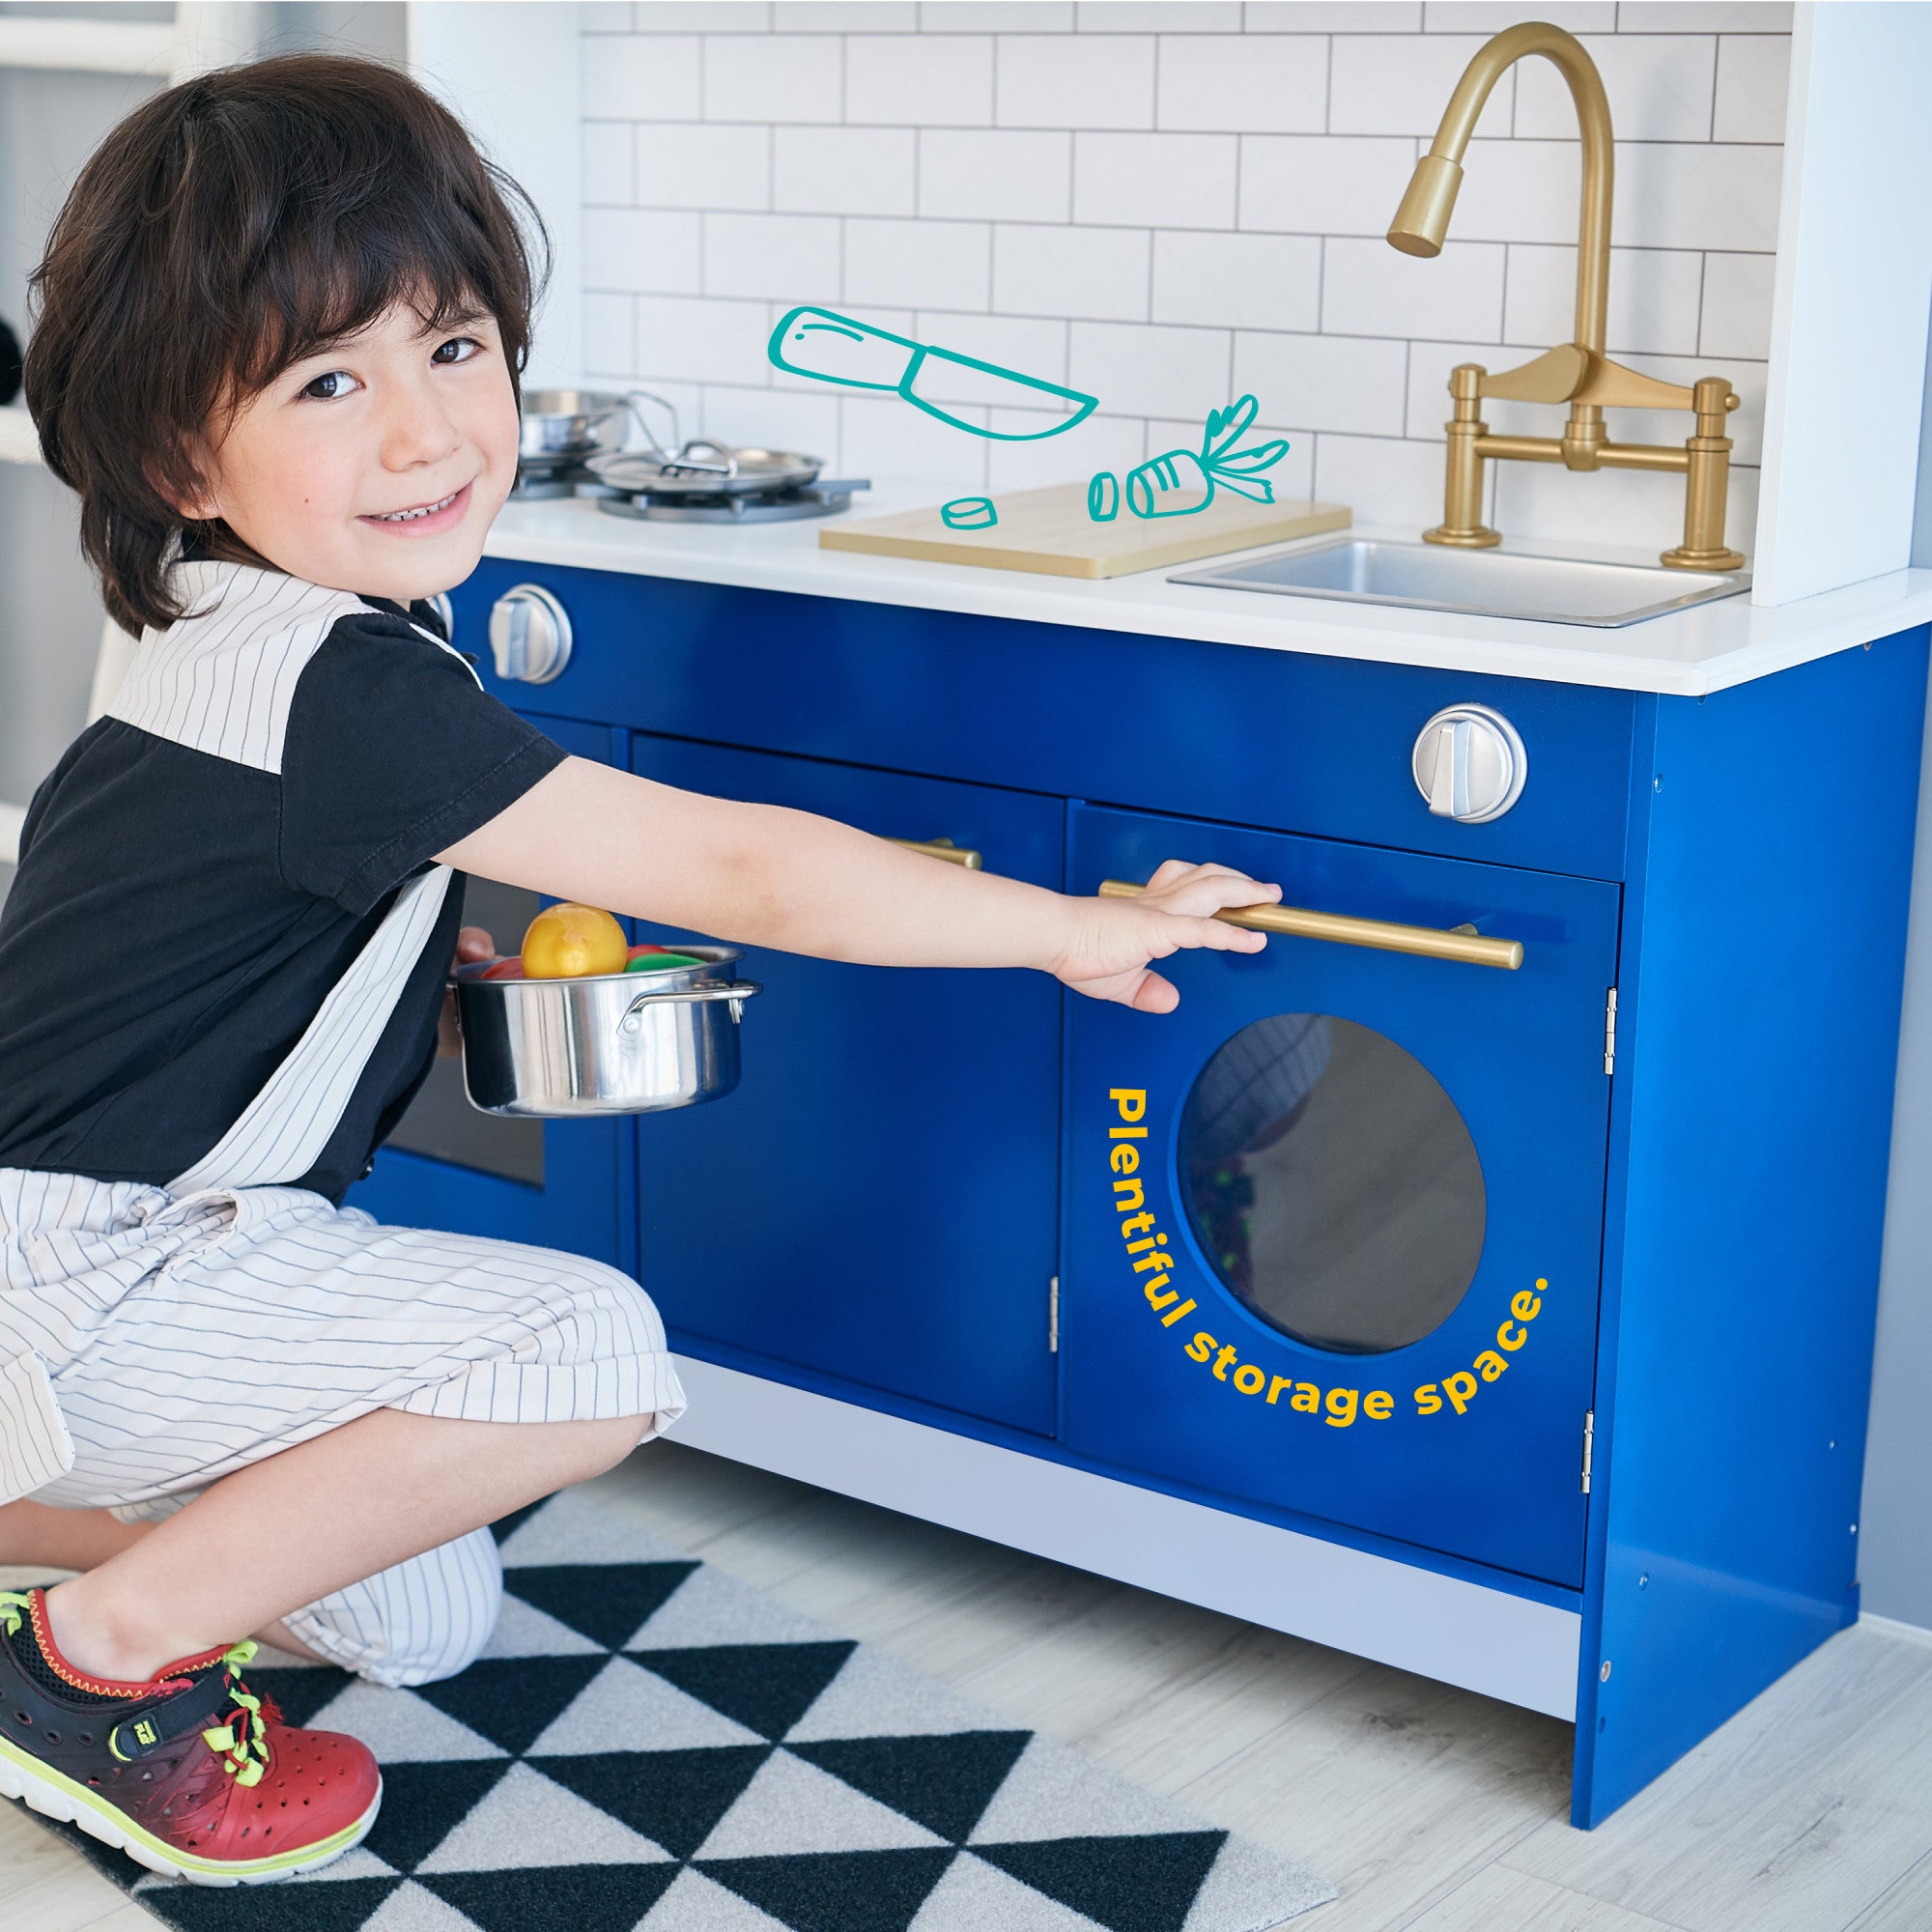 Teamson Kids Little Chef Berlin Play Kitchen with Cookware Accessories, White/Blue